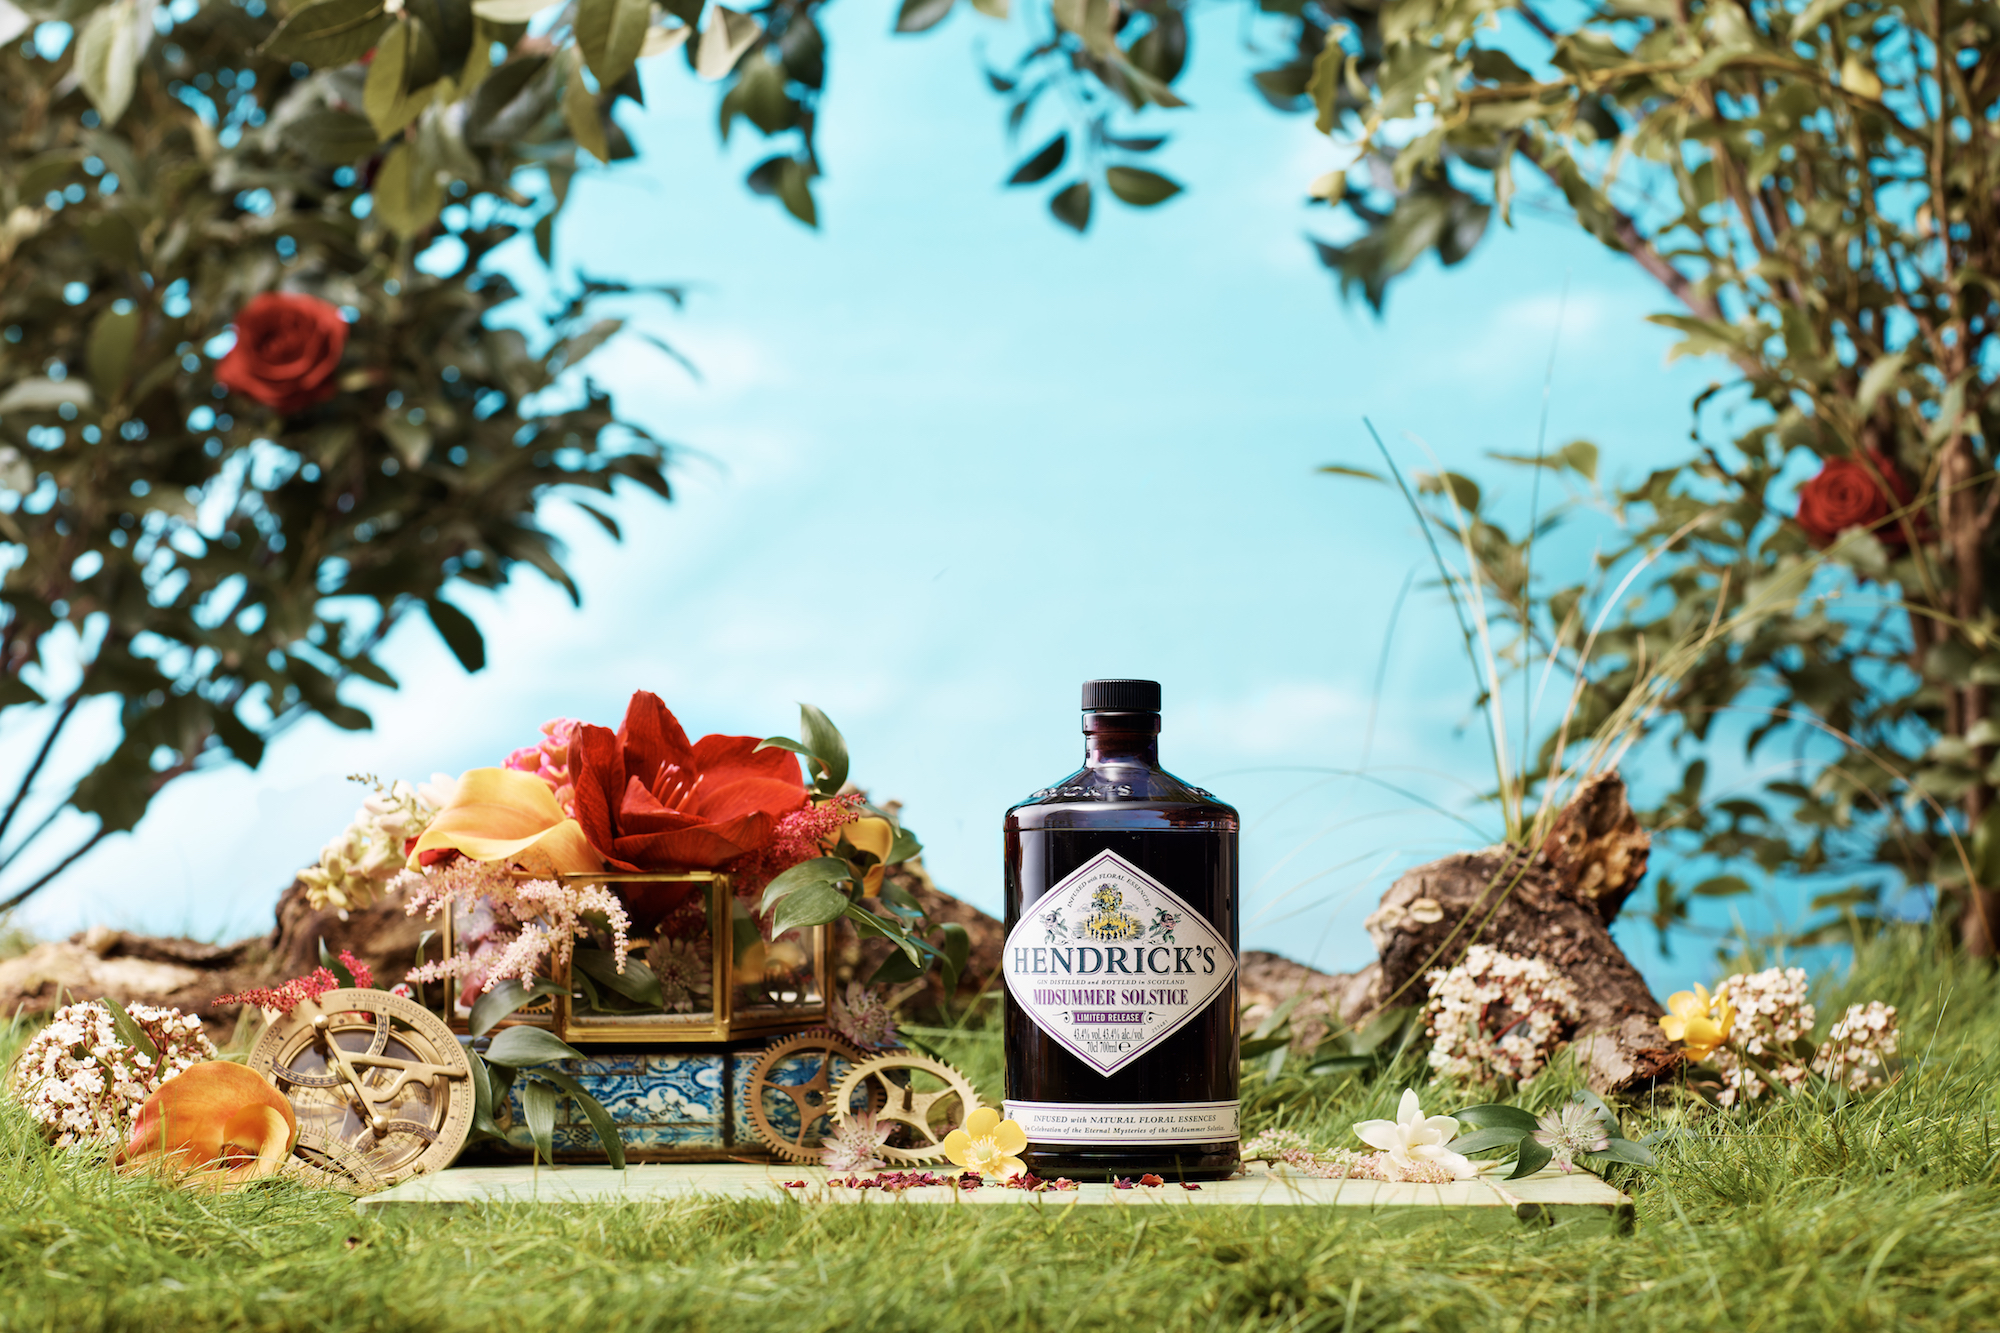 Hendricks Captures The Beauty Of A Midsummers Day With Its New Limited Edition Gin Nestia